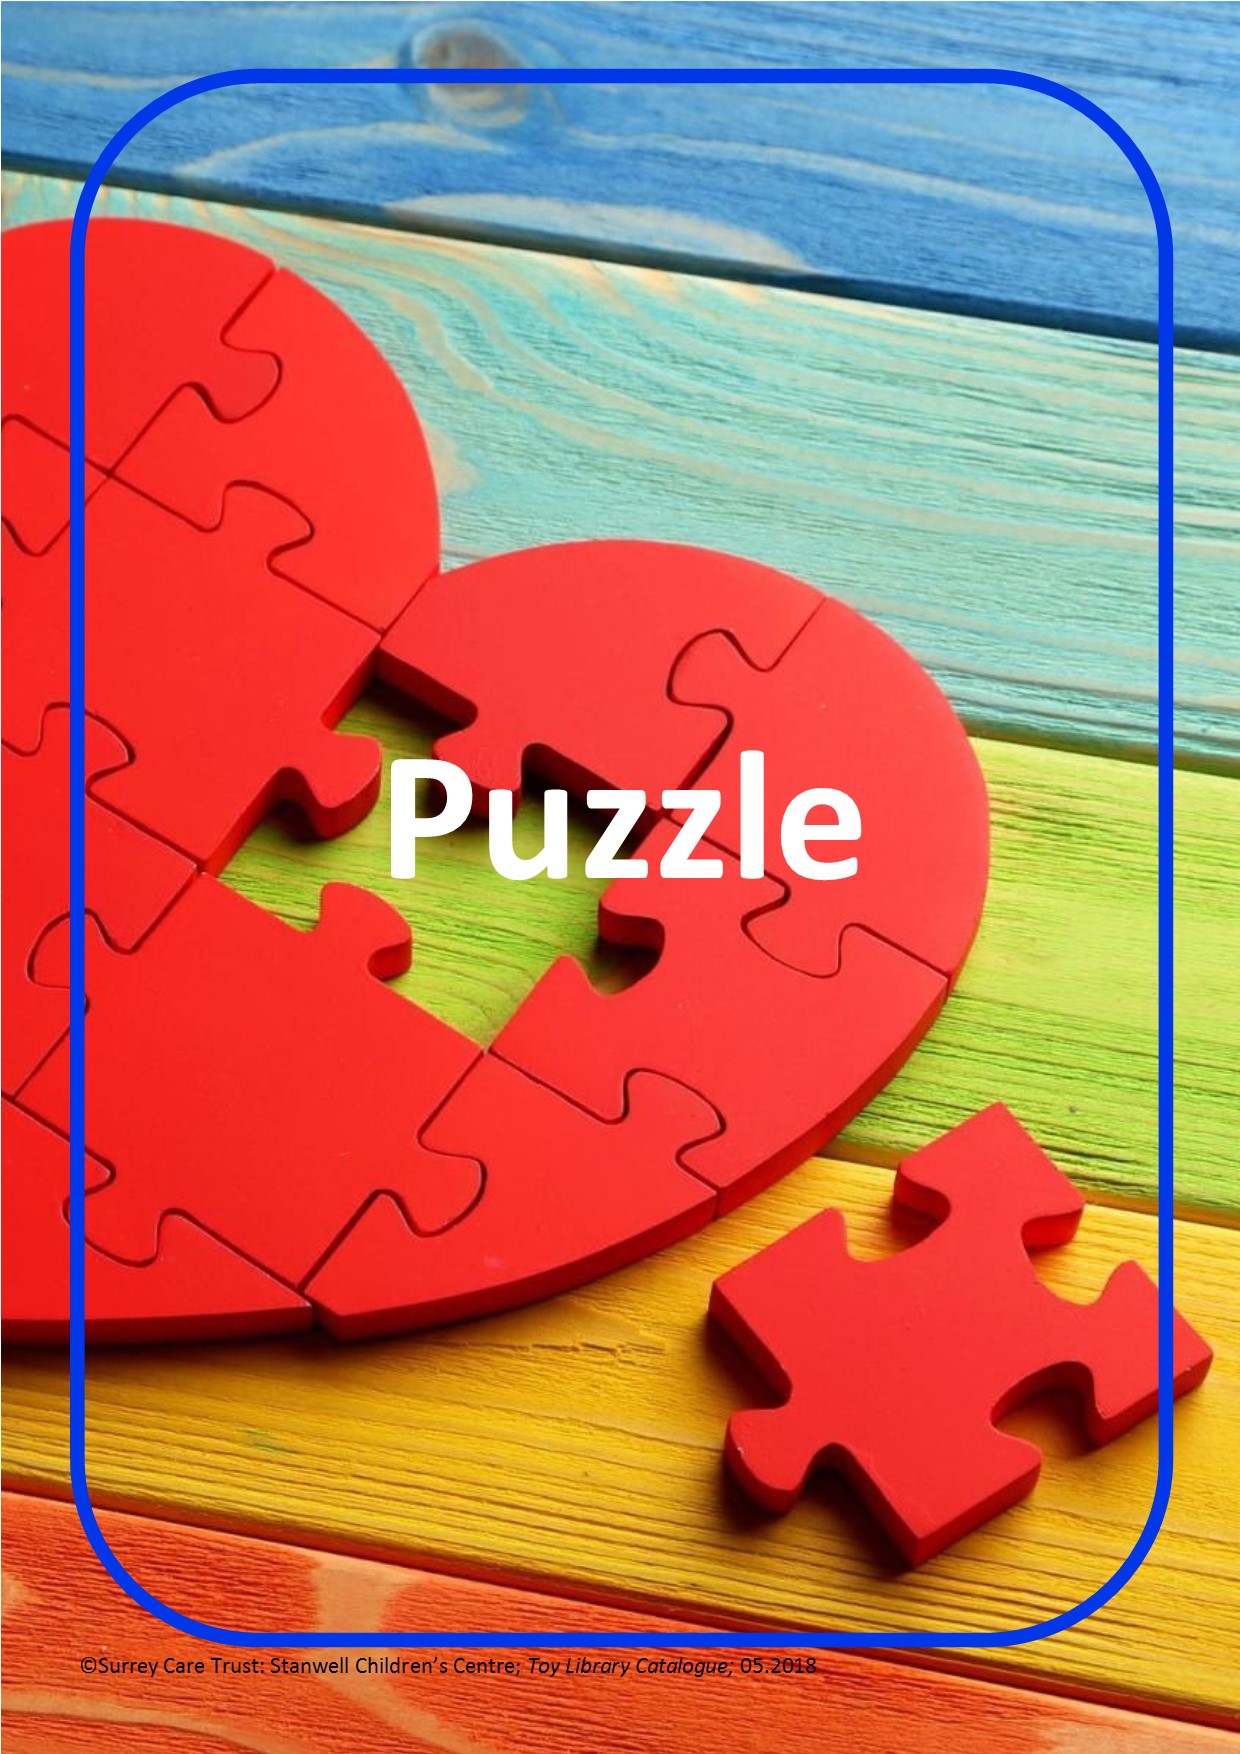 Puzzle Section.jpg